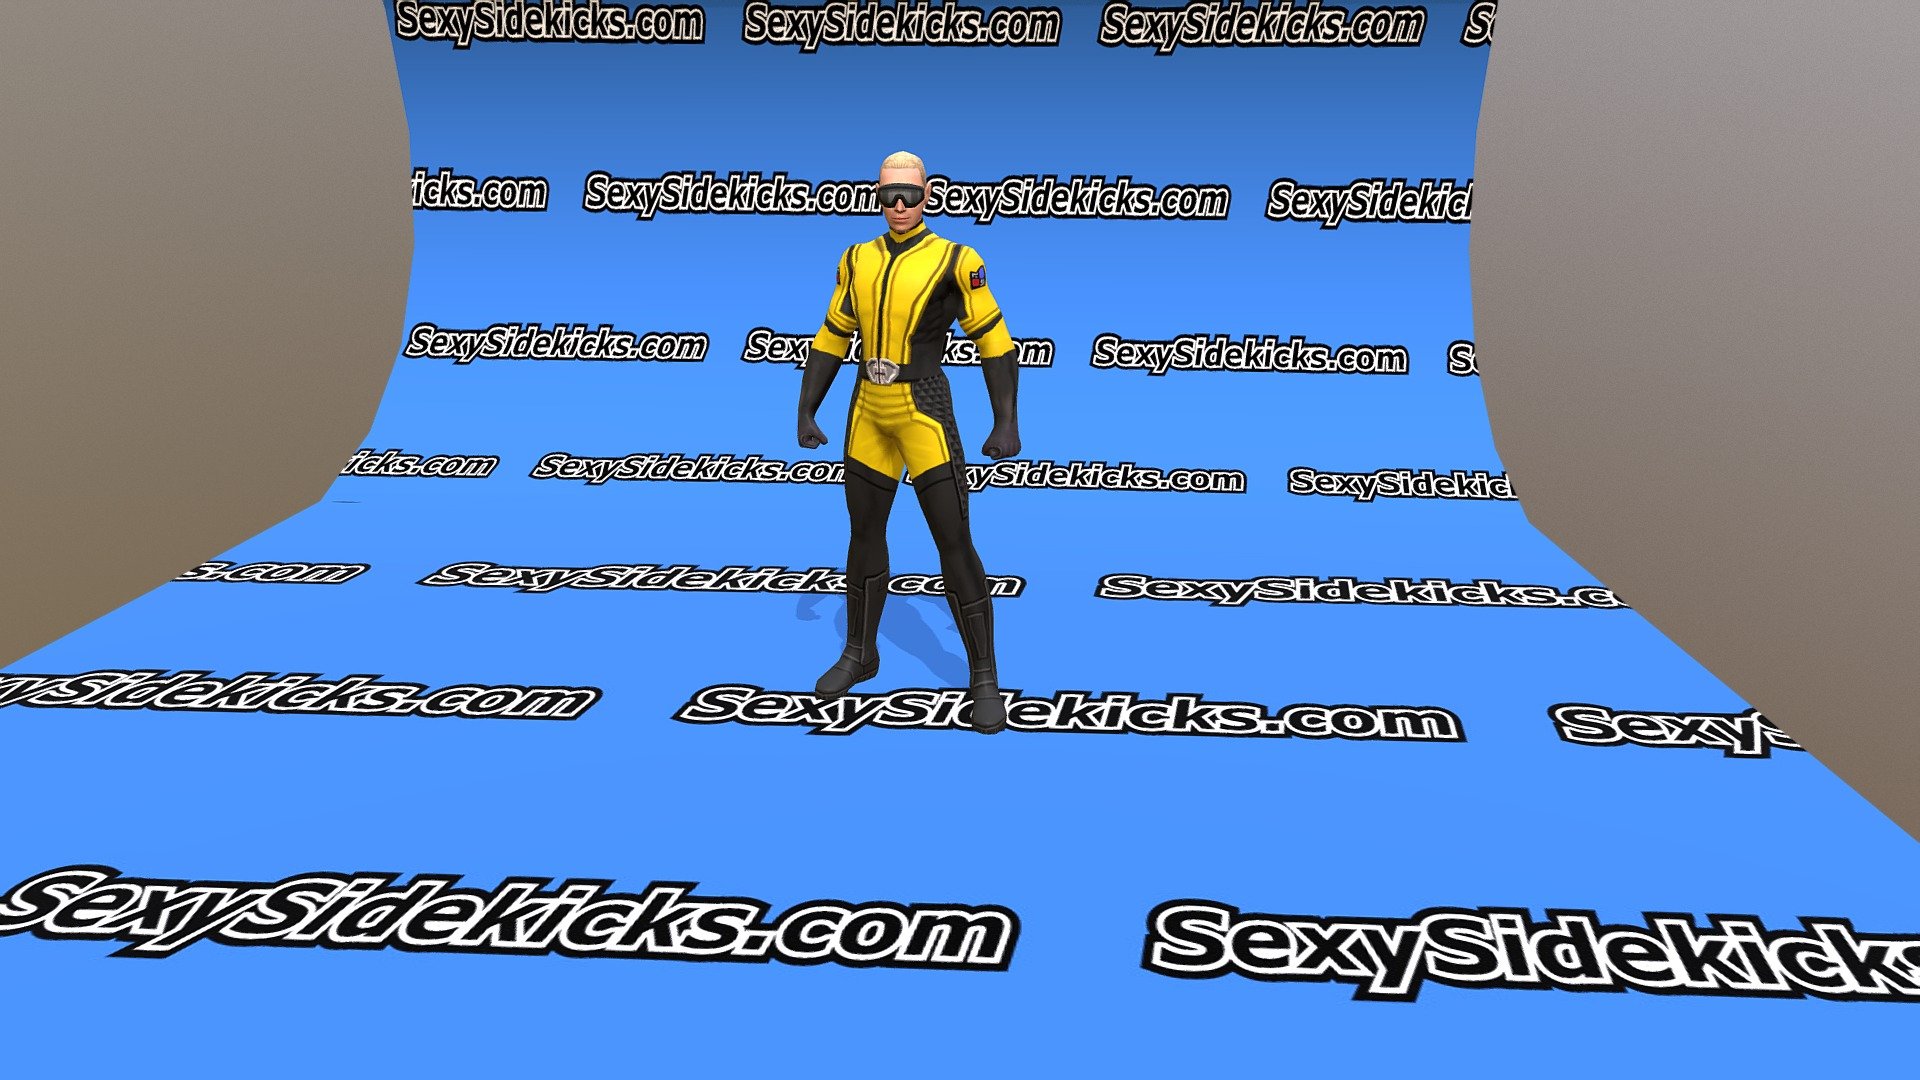 The Superhero Construction Kit will be for sale in May 2018. 

The Superhero Construction Kit includes:
        42 male superhero animations (root motion and non root included)
        42 female superhero animations (root motion and non root included)
        15 male outfits
        20 female outfits
        30 female hairstyles
        20 male hairstyles
        PSD layers for changing haircolor, eye color, faces, skin color
        PSD layers for outfits, so you can mix and match - Superhero Construction Kit Preview #2 - 3D model by rungy 3d model